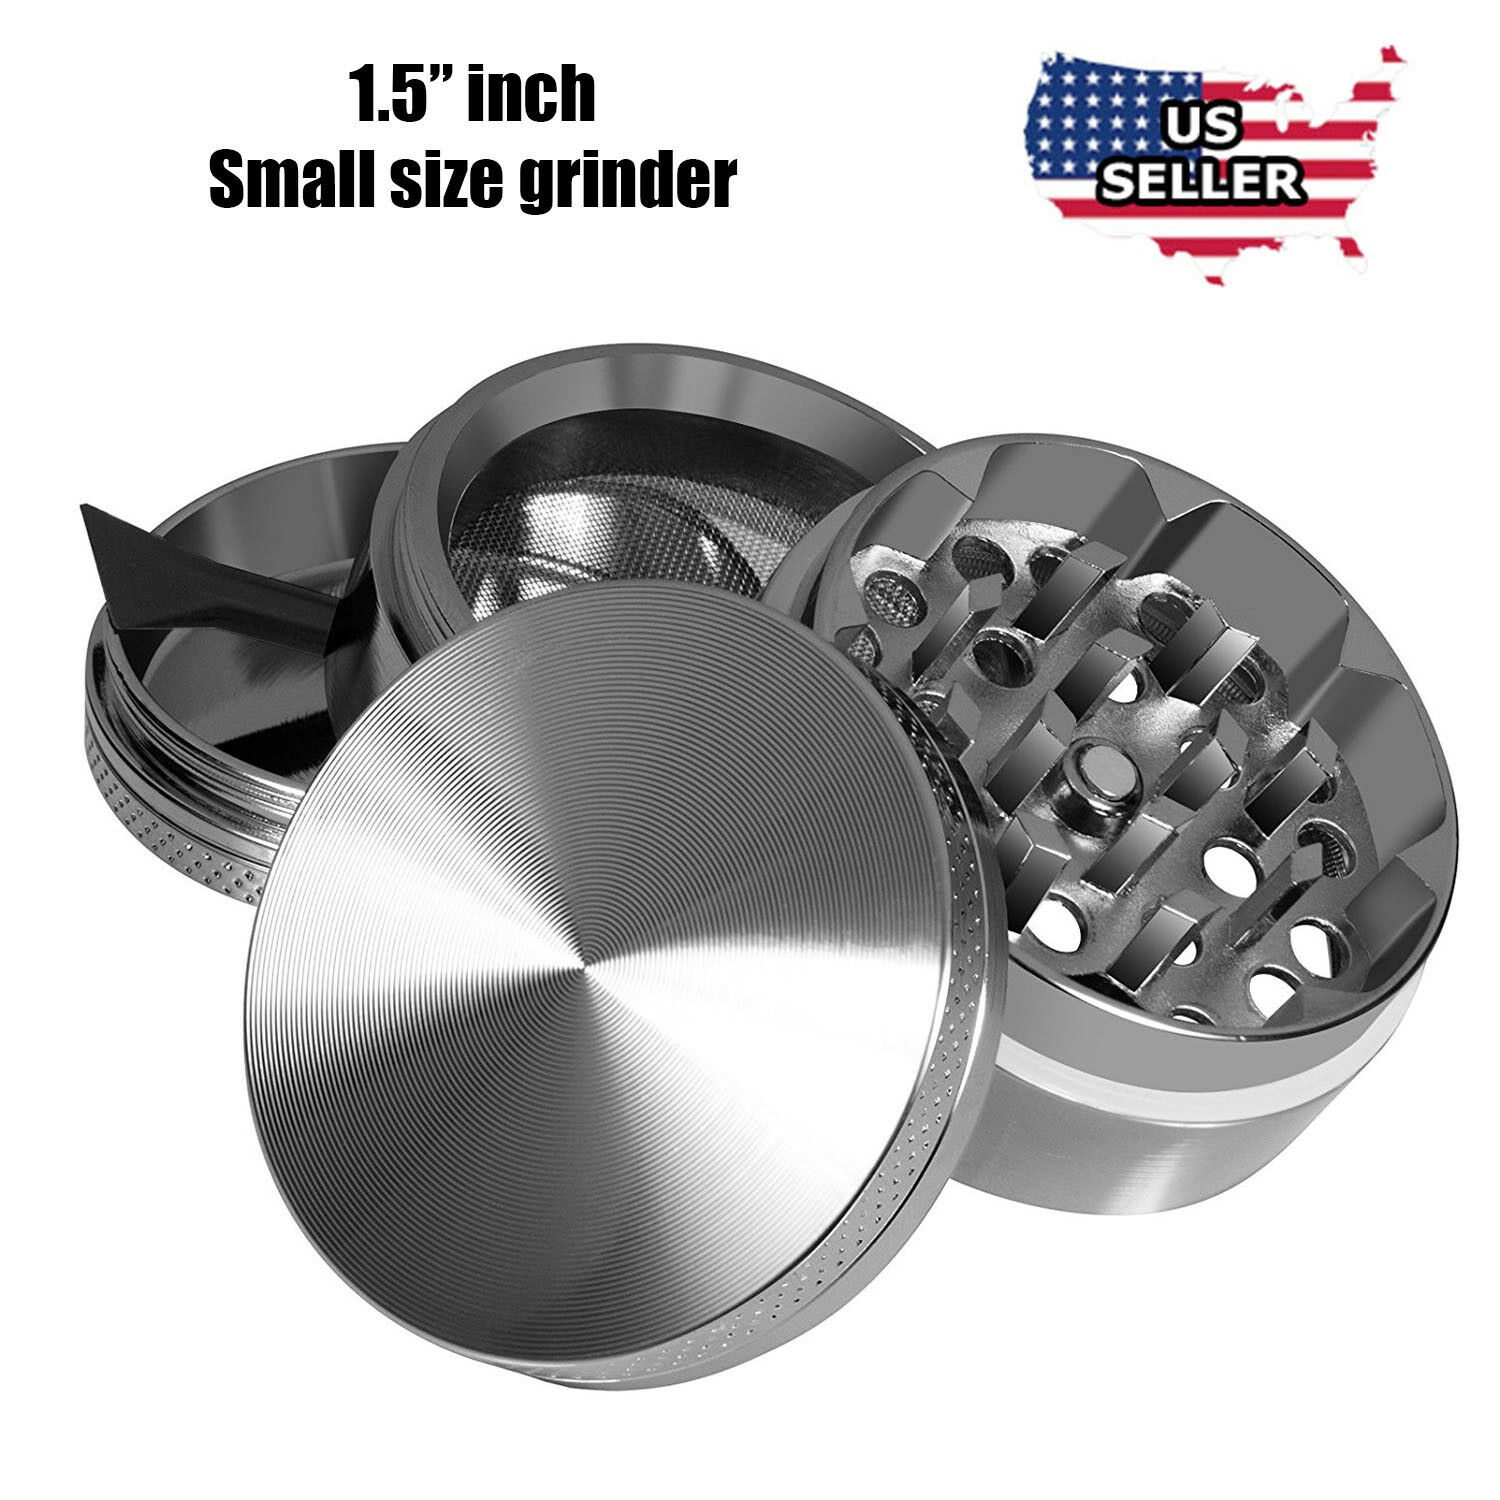 4 Piece Magnetic 1.5 Inch Grey Tobacco Herb Grinder Spice Aluminum With Scoop